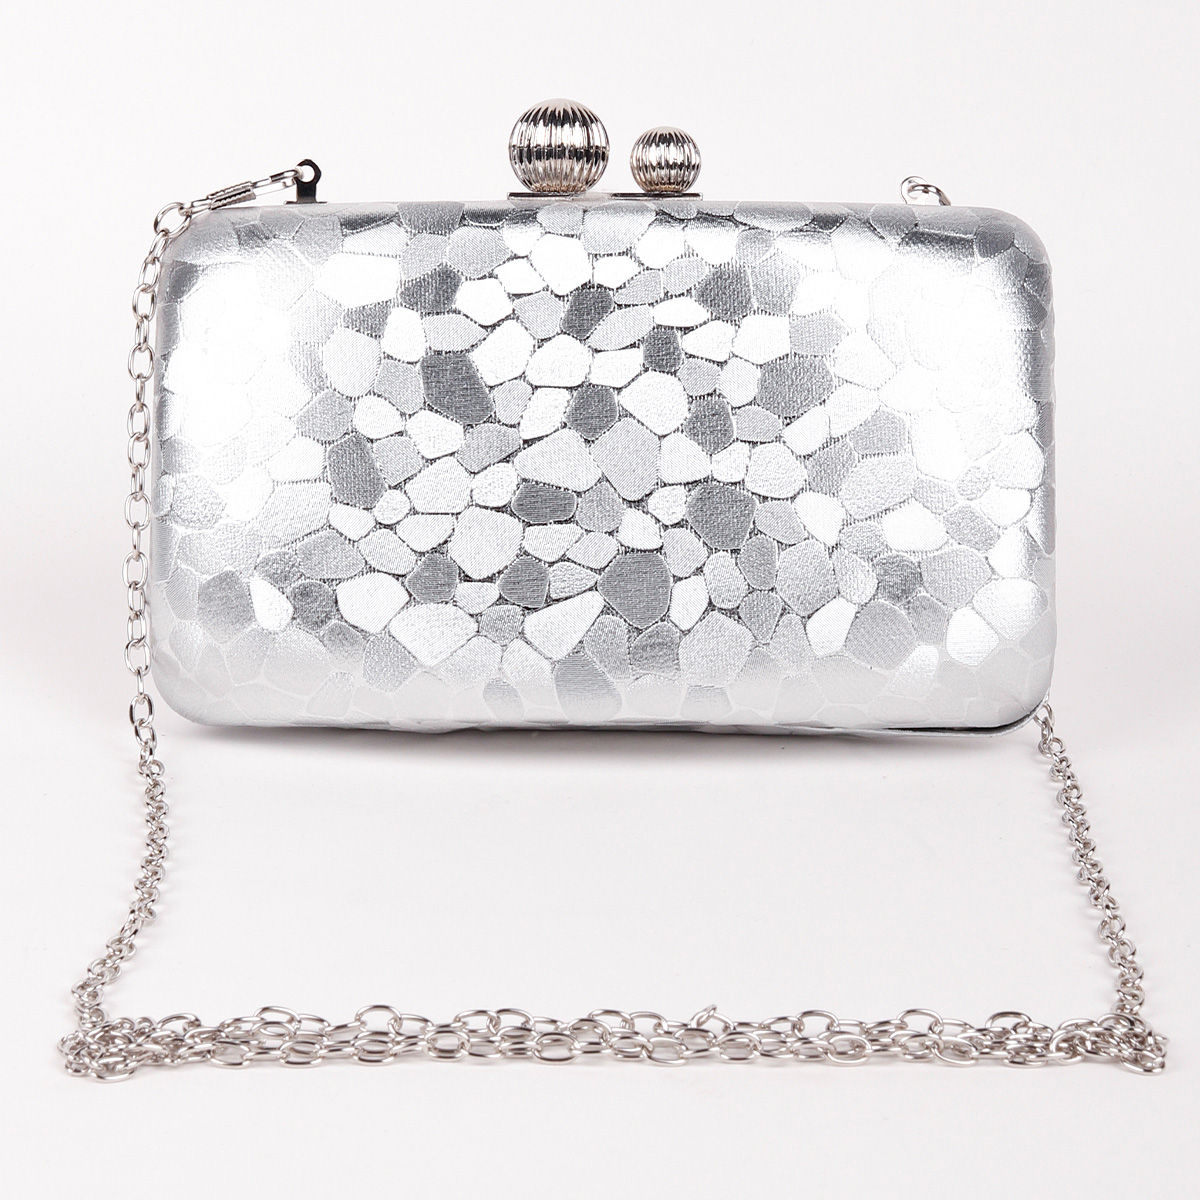 mlpeerw Womens Clutch Bag Glitter Sparkling Bling India | Ubuy